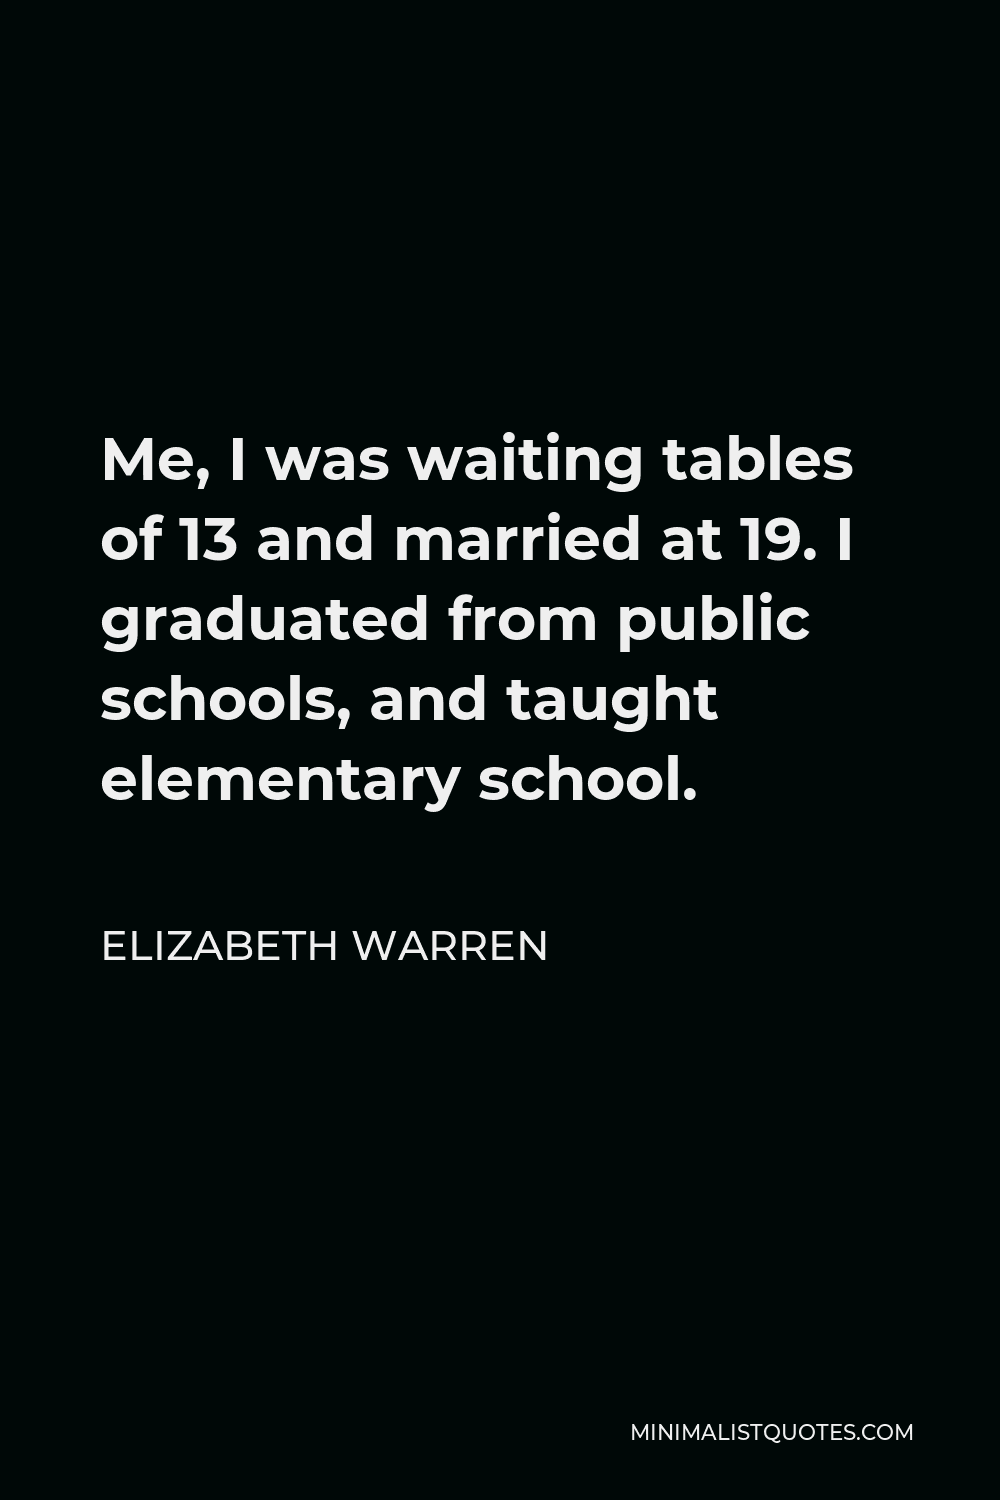 Elizabeth Warren Quote - Me, I was waiting tables of 13 and married at 19. I graduated from public schools, and taught elementary school.